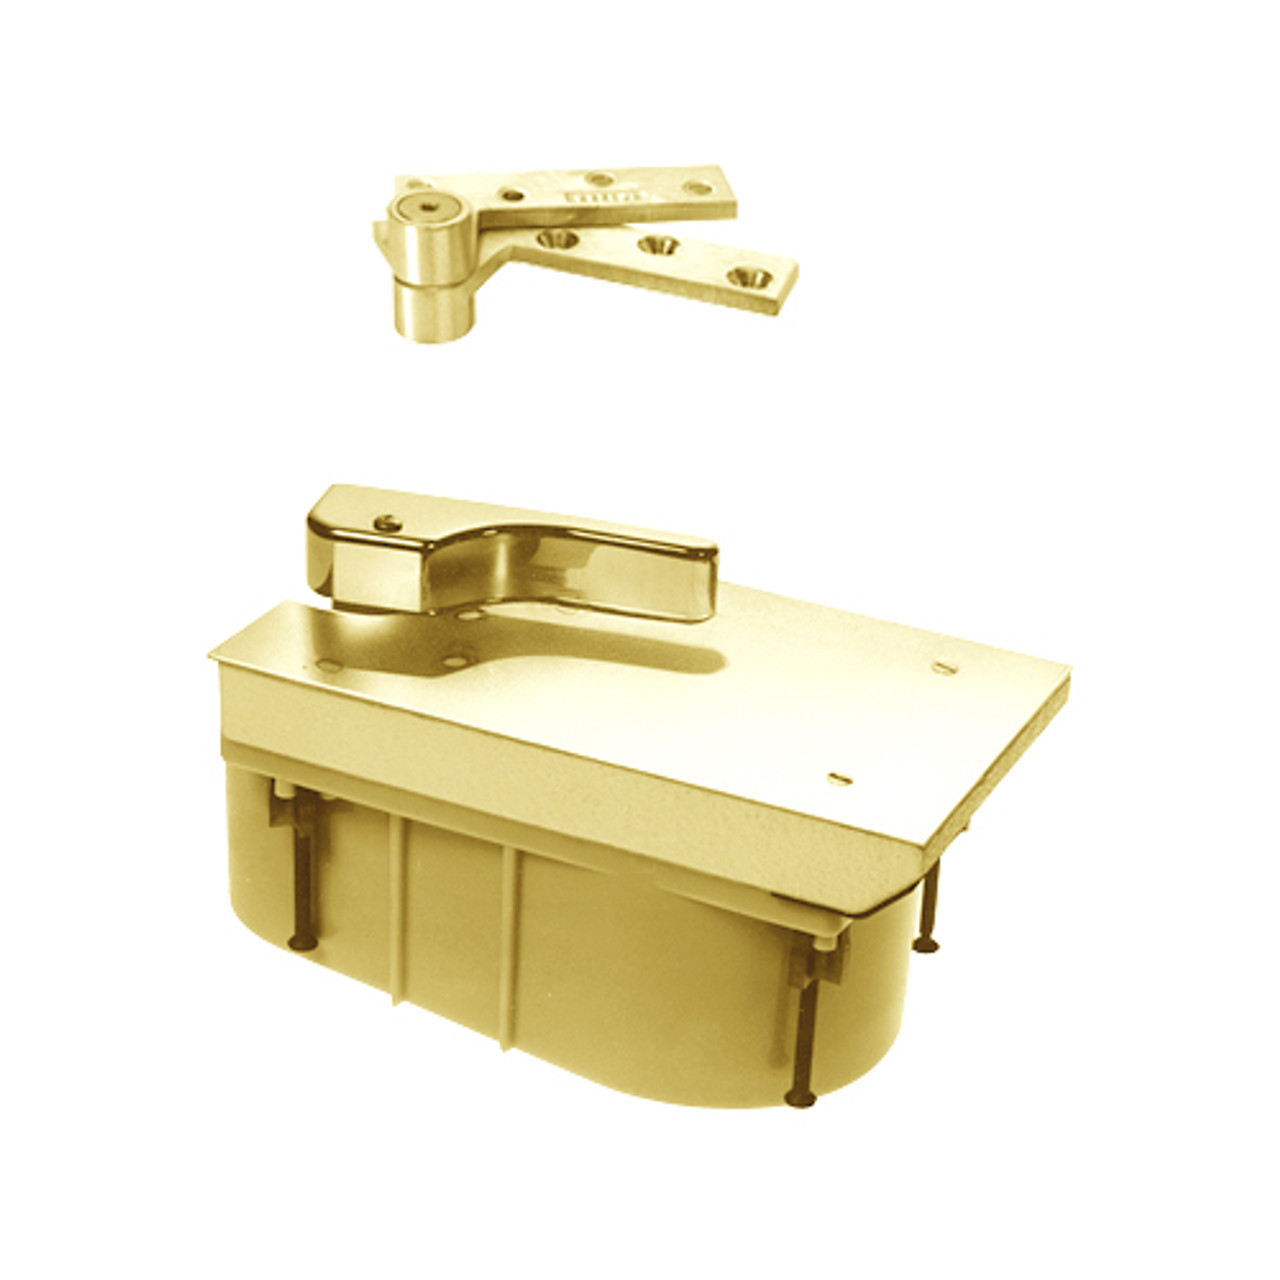 Q27-85S-LFP-CWF-LH-605 Rixson 27 Series Heavy Duty Quick Install Offset Hung Floor Closer in Bright Brass Finish